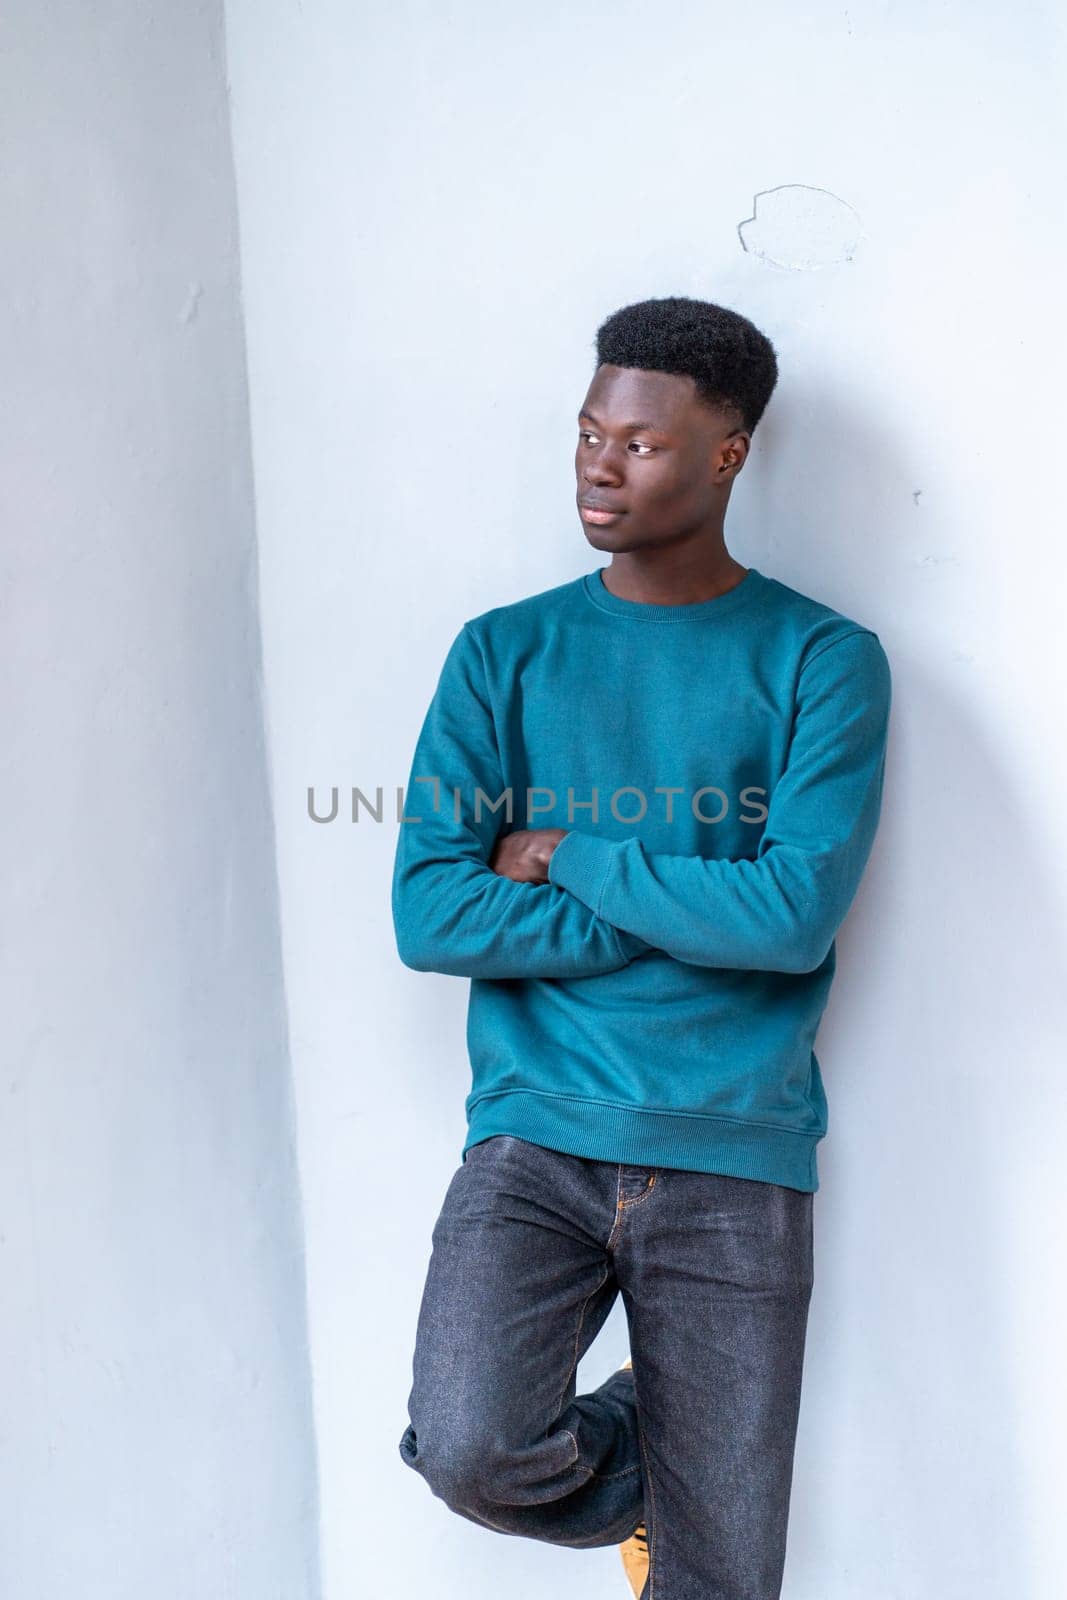 A young man in a blue sweatshirt and jeans stands against a white wall. He is looking off into the distance with his arms crossed. Concept of introspection and contemplation